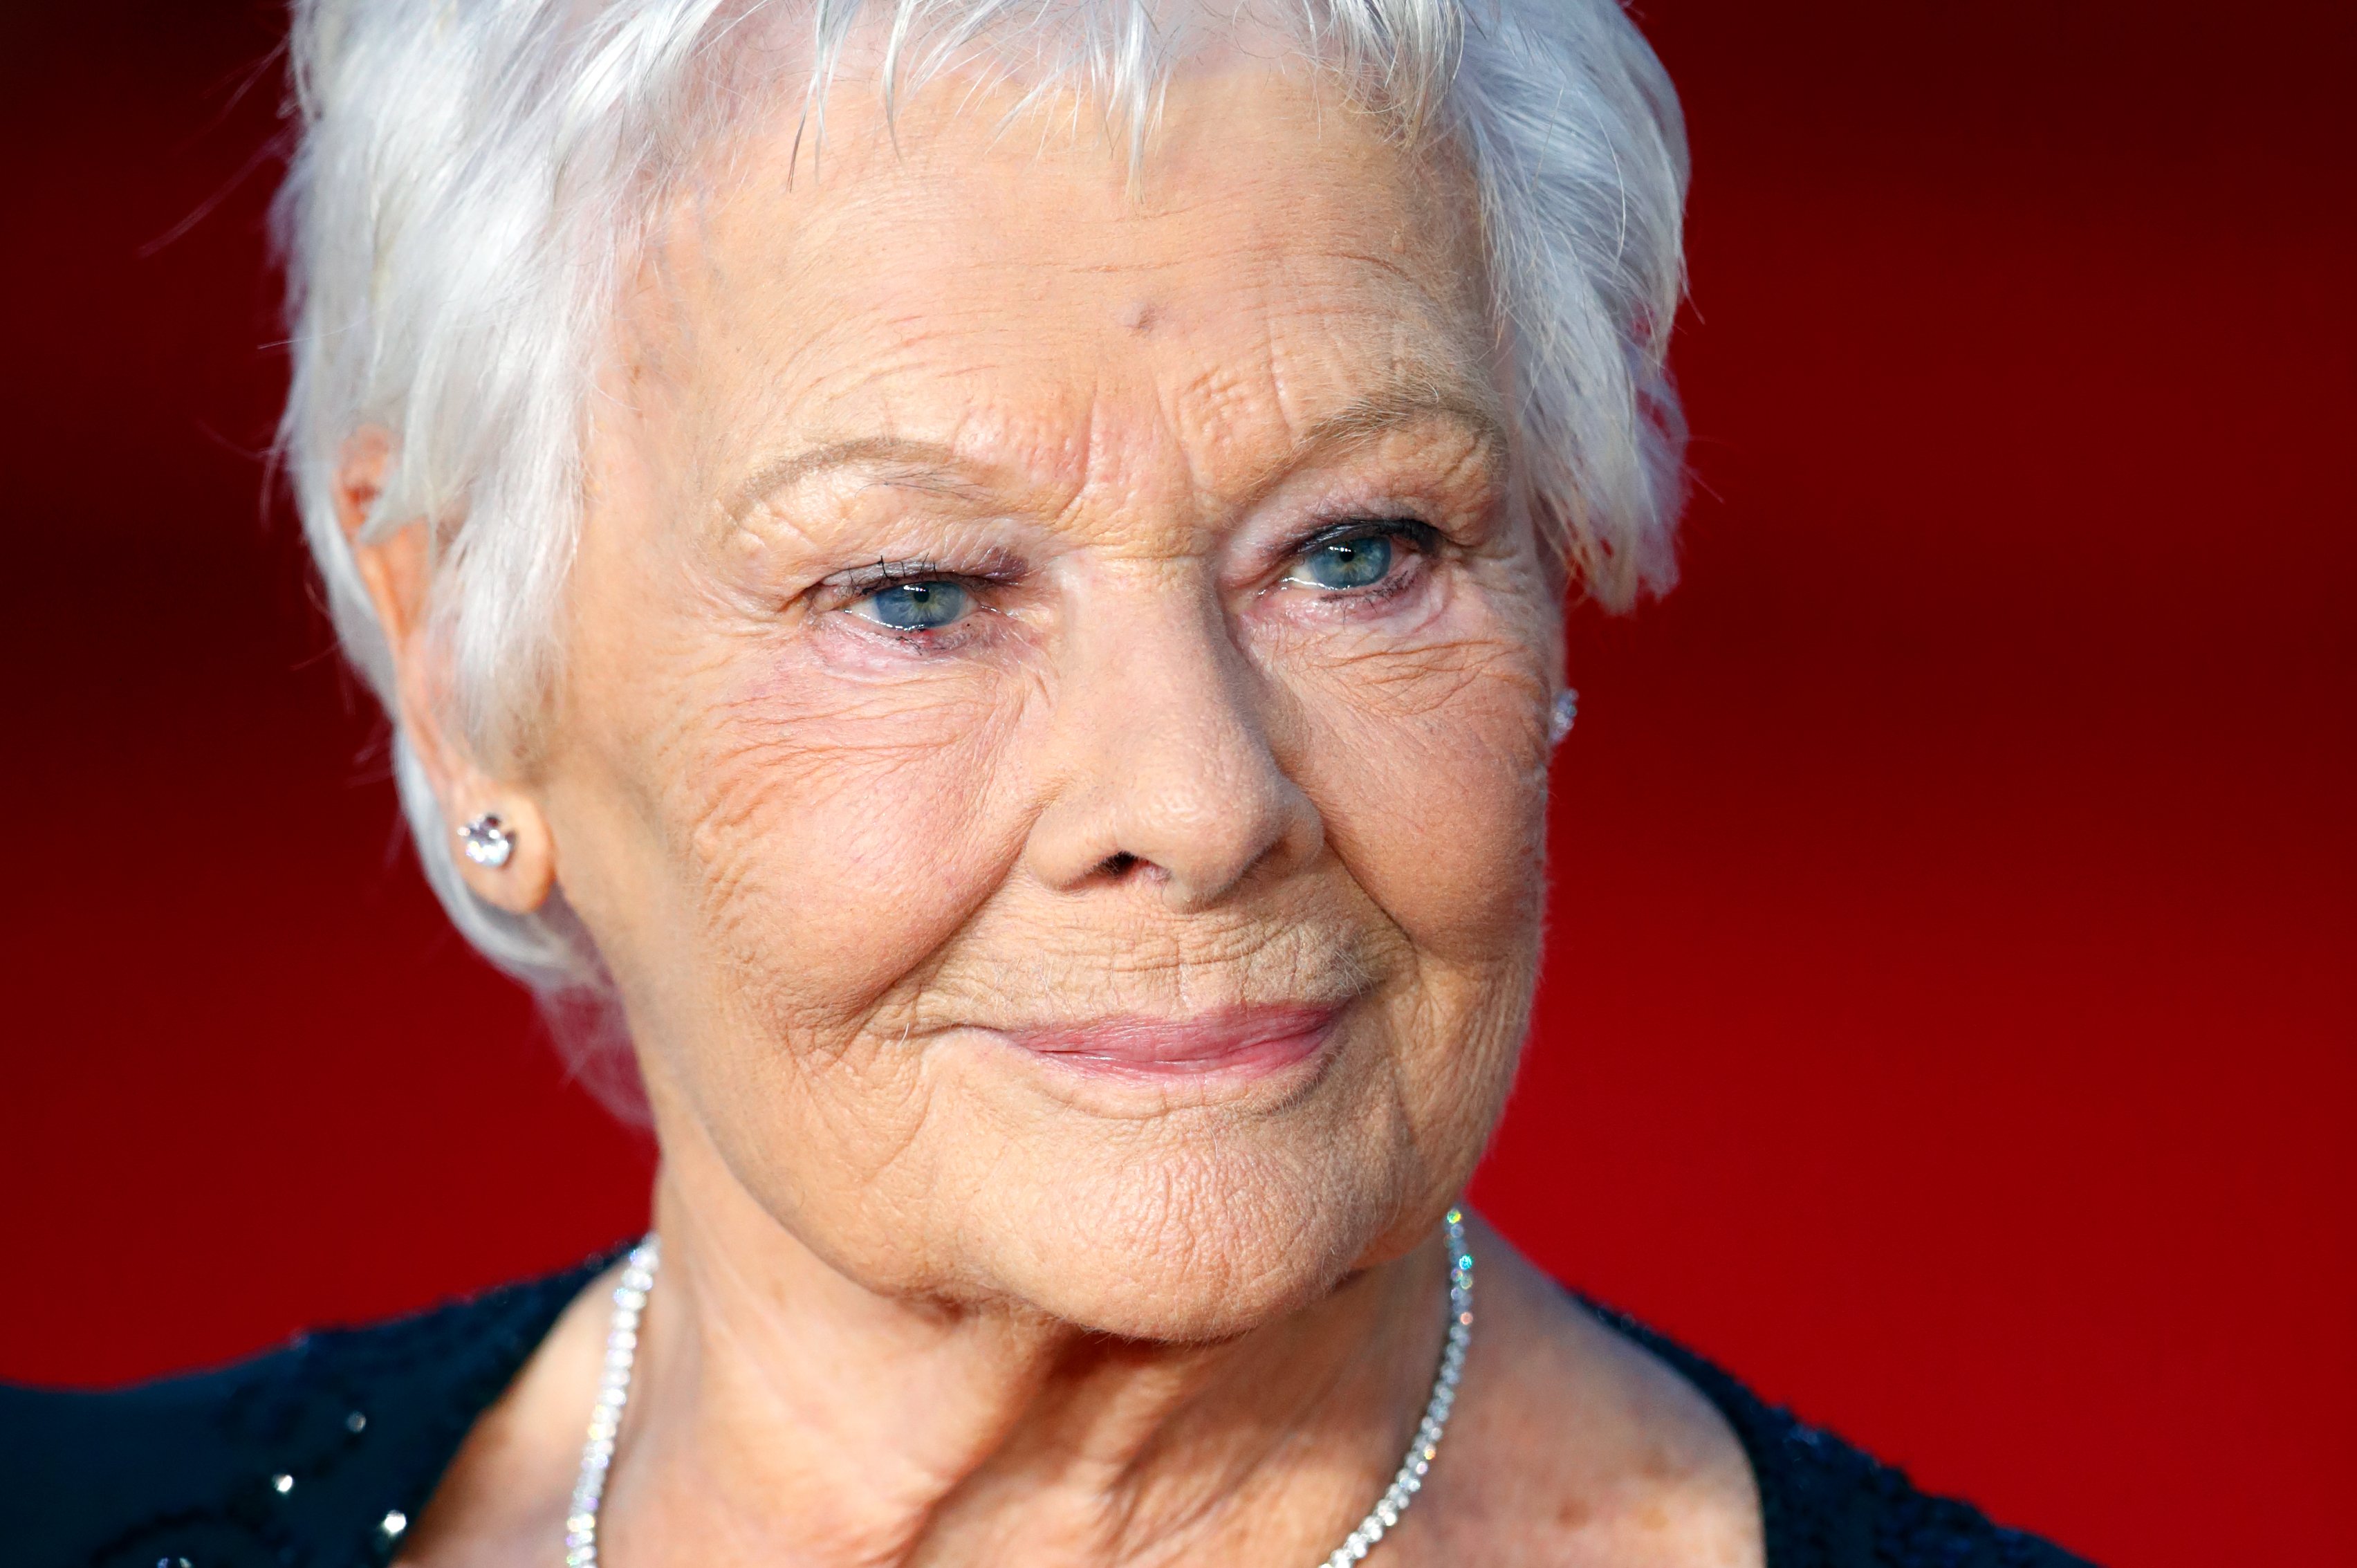 Judi Dench at the "No Time To Die" world premiere on September 28, 2021 | Source: Getty Images